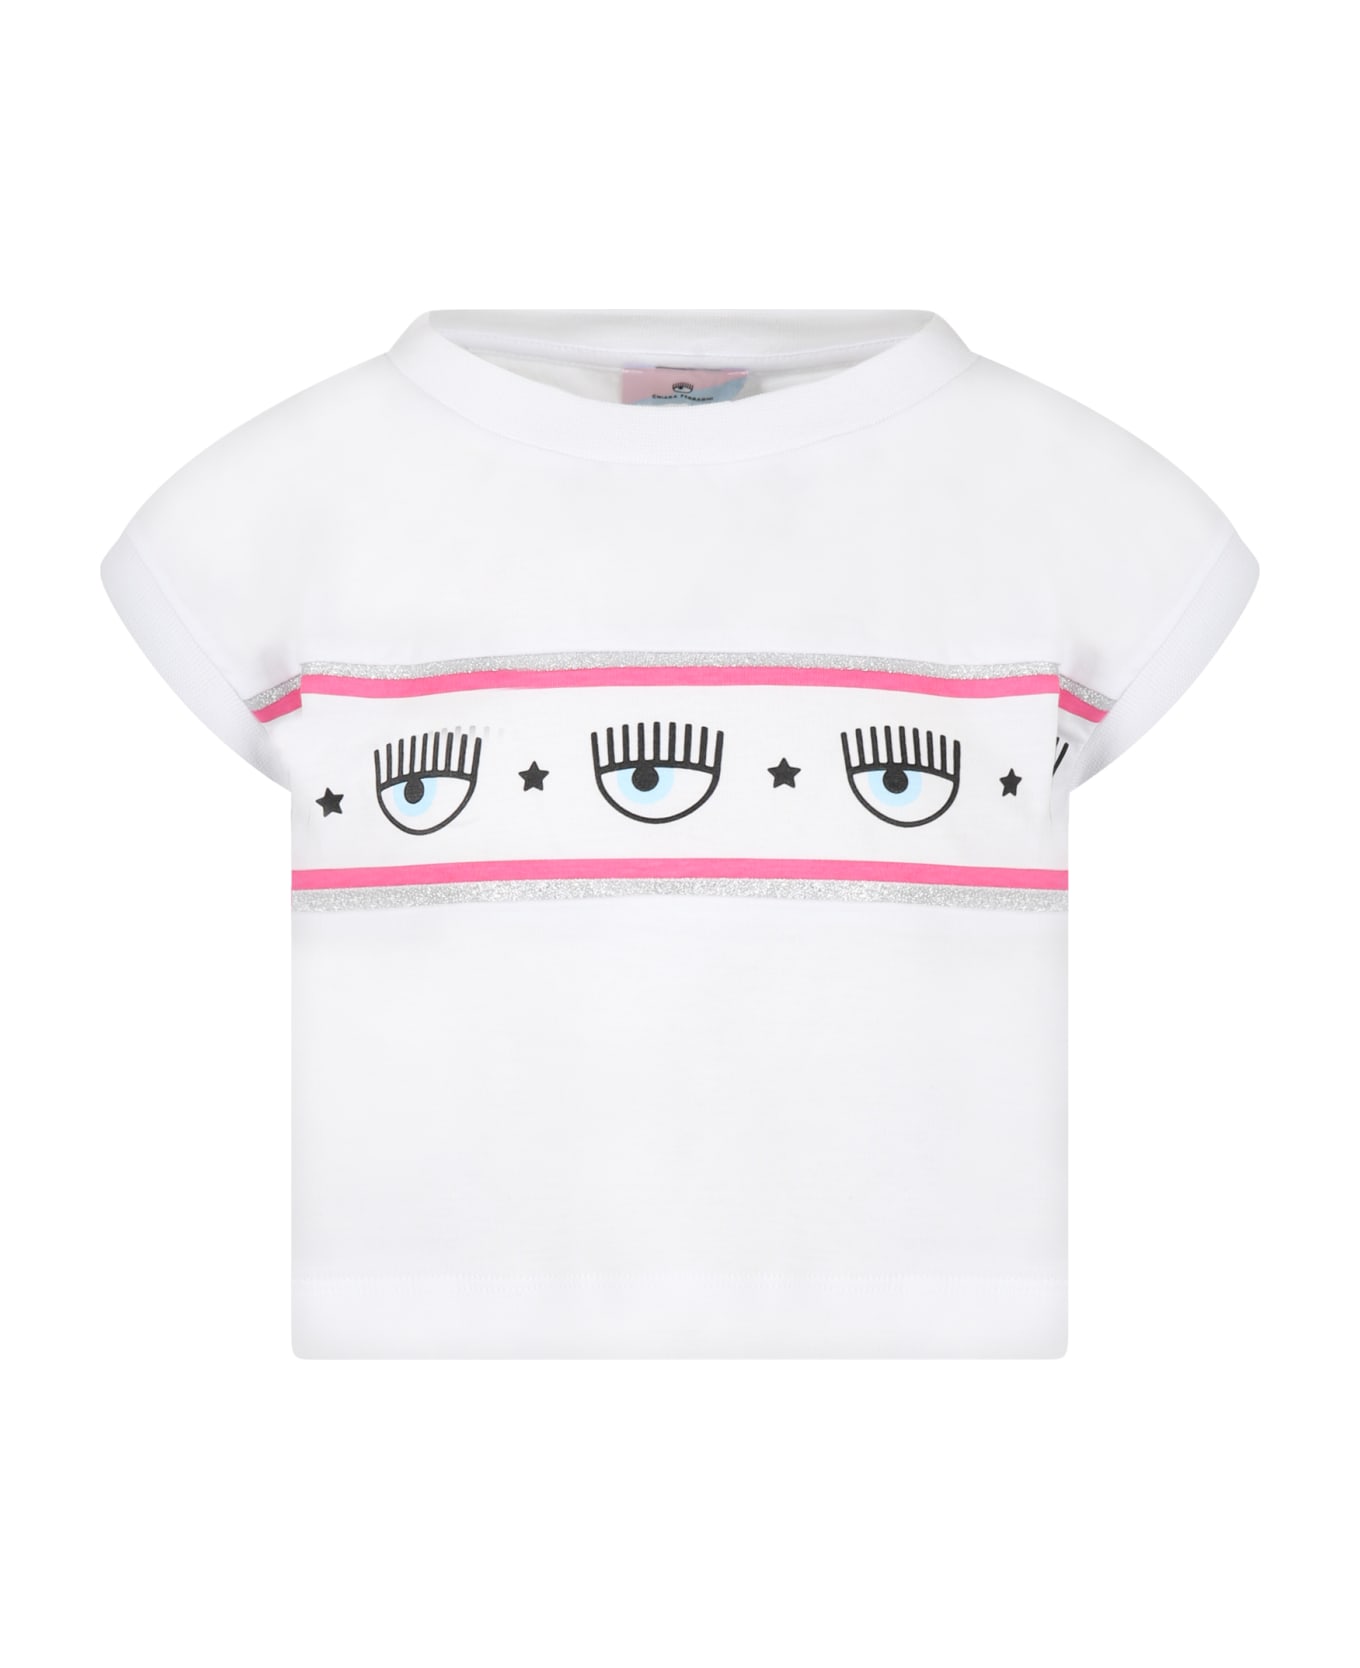 Chiara Ferragni White T-shirt For Girl With Iconic Winks